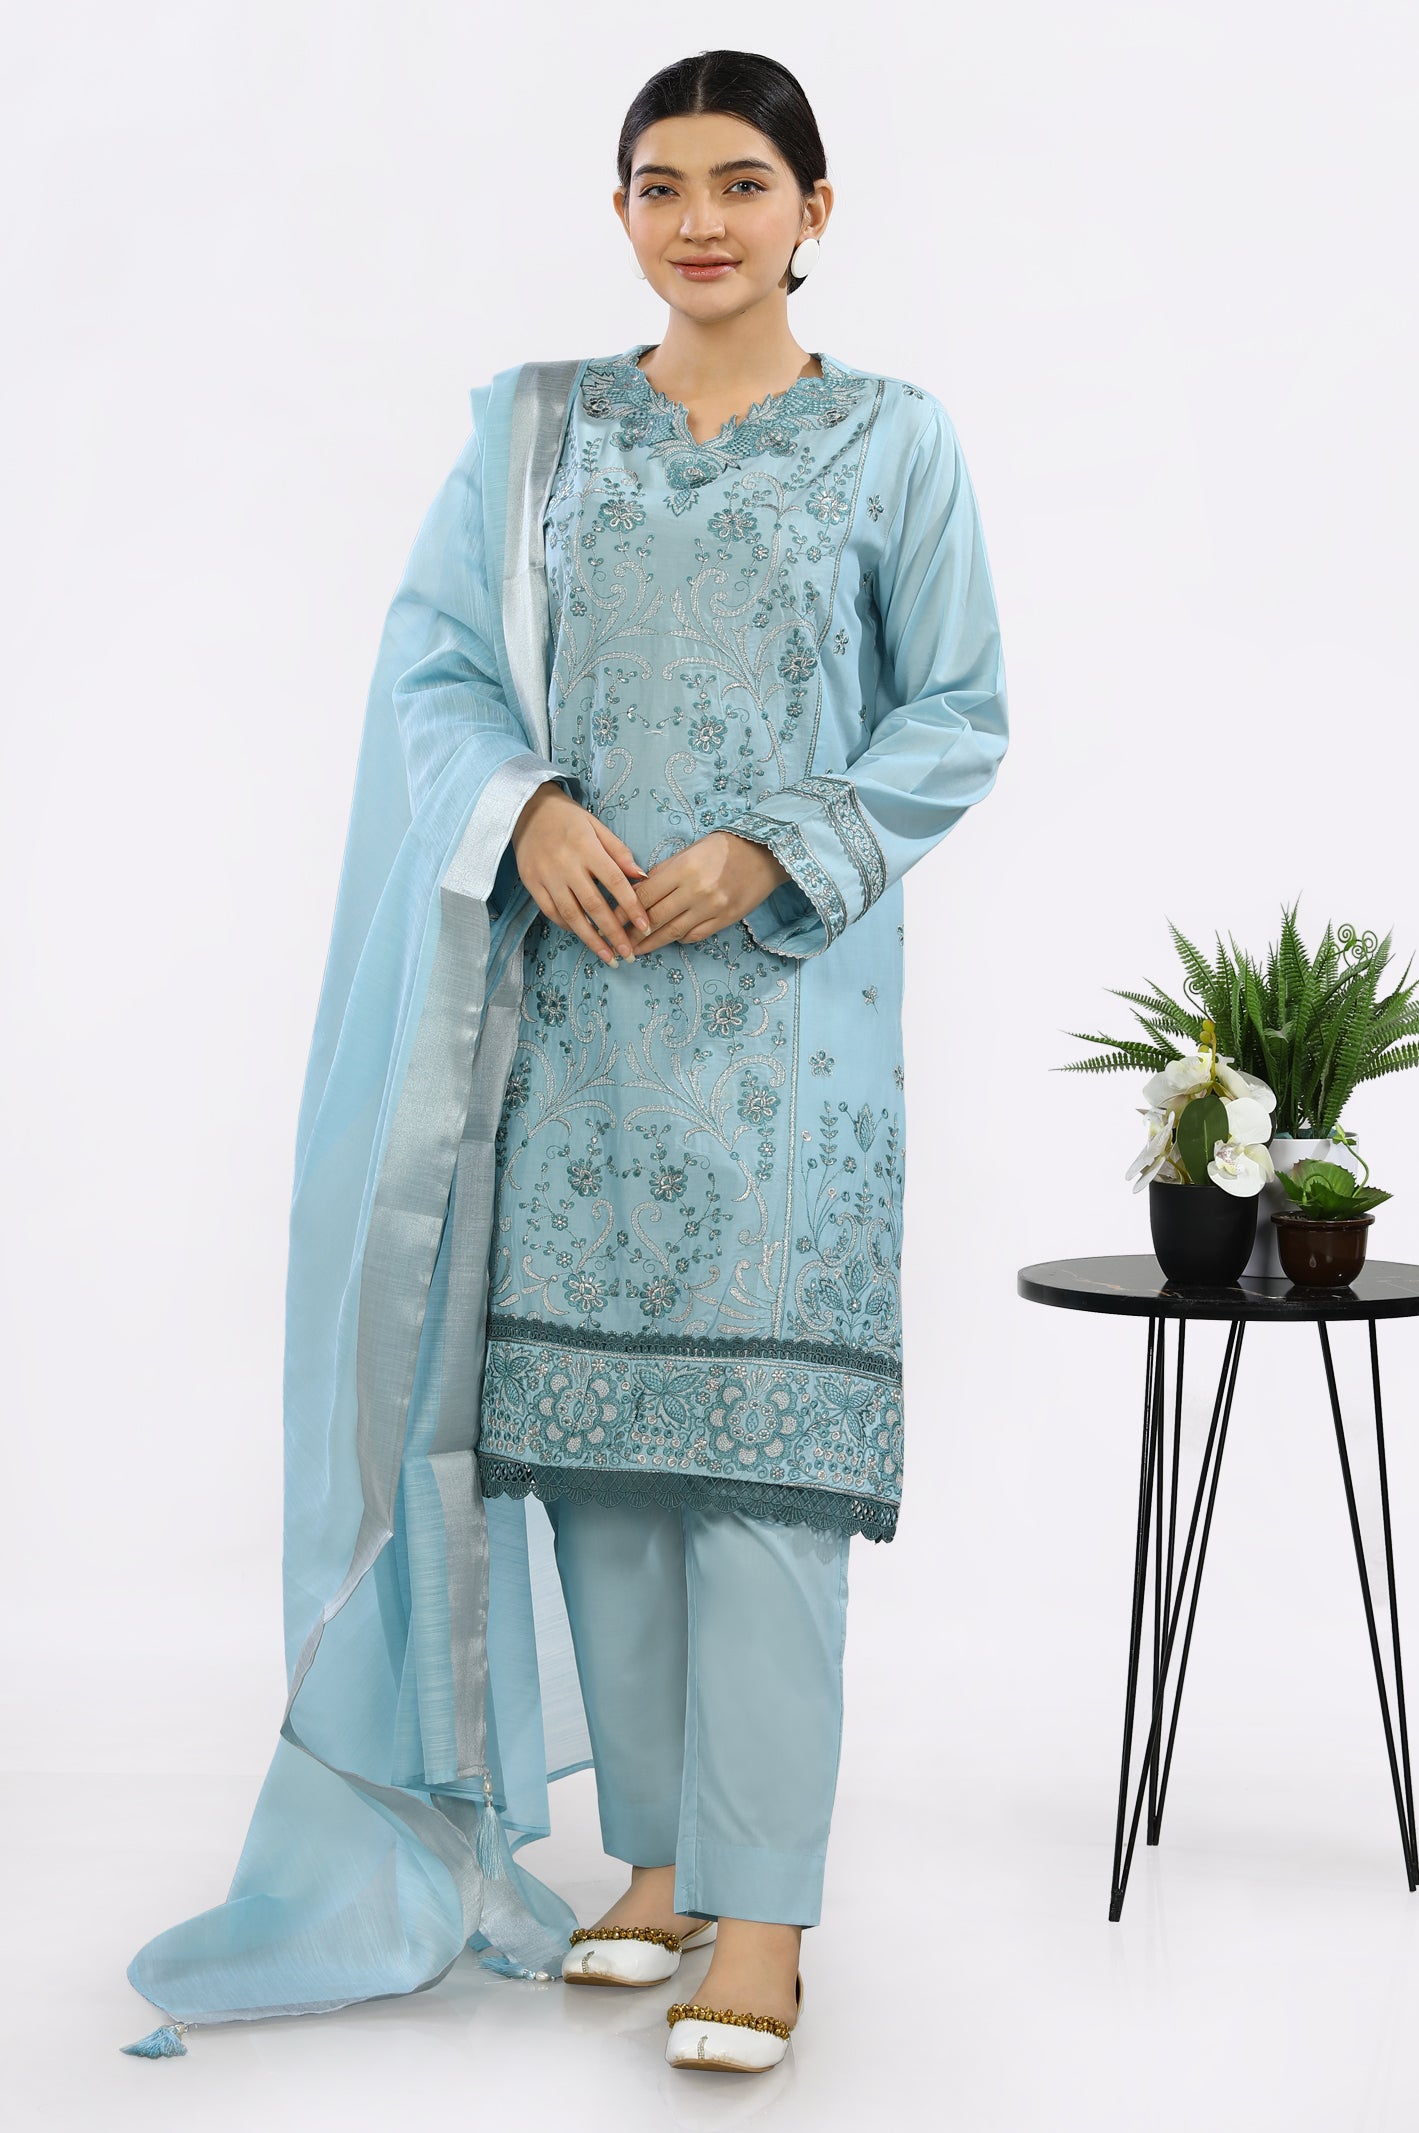 3PC Embroidered Sky Blue Suit From Diners